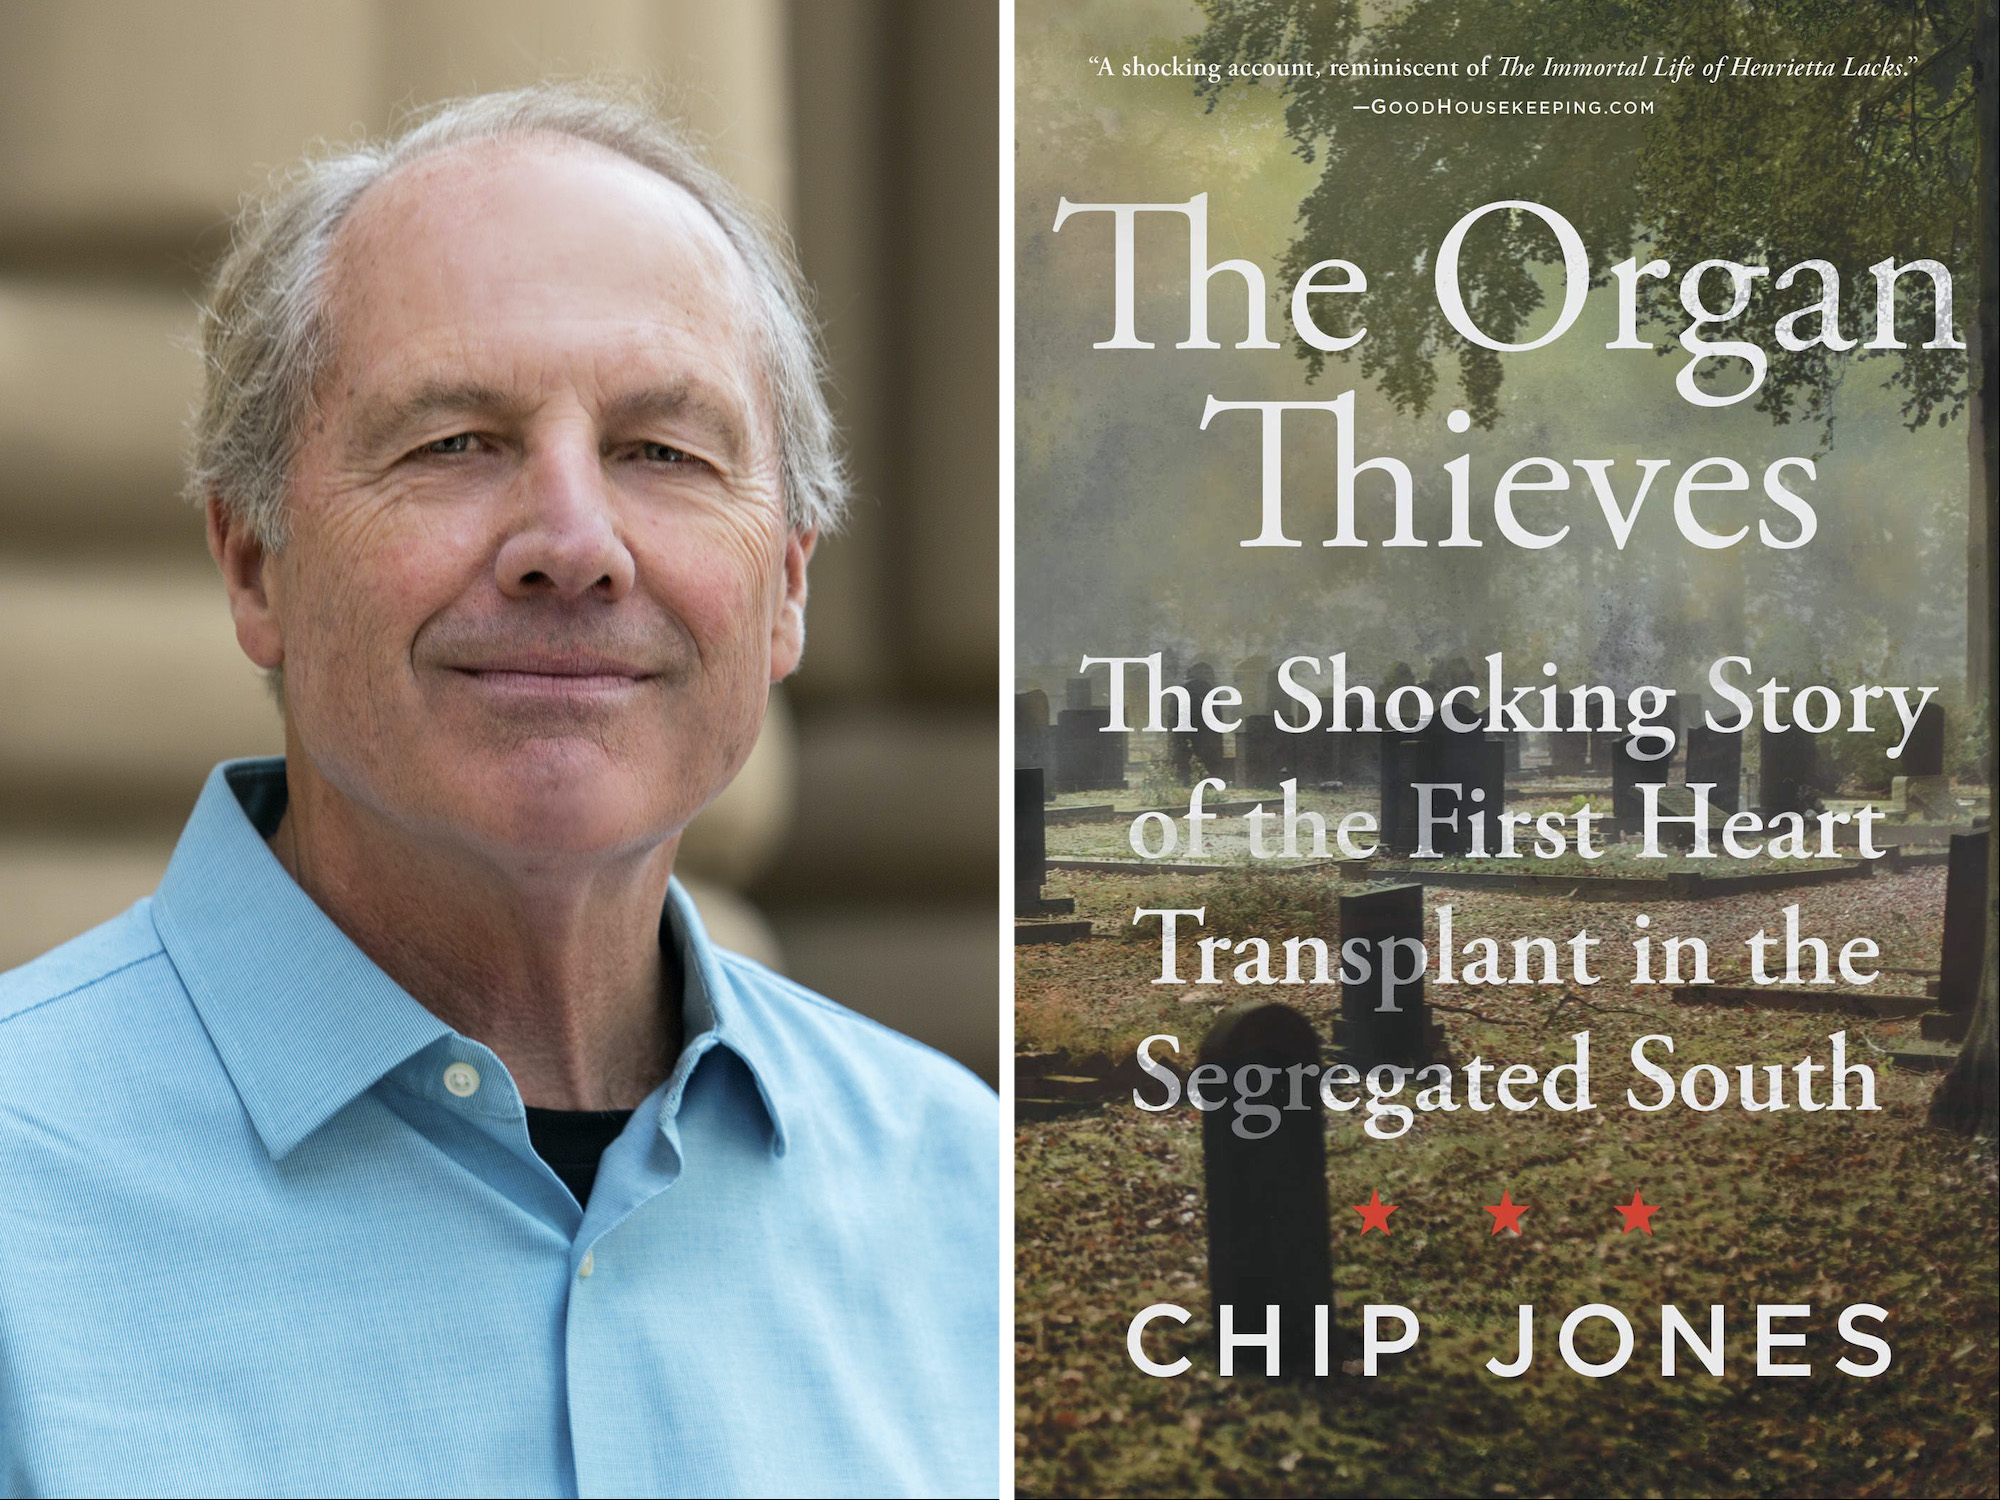 Chip Jones author photo and the cover of his book The Organ Thieves